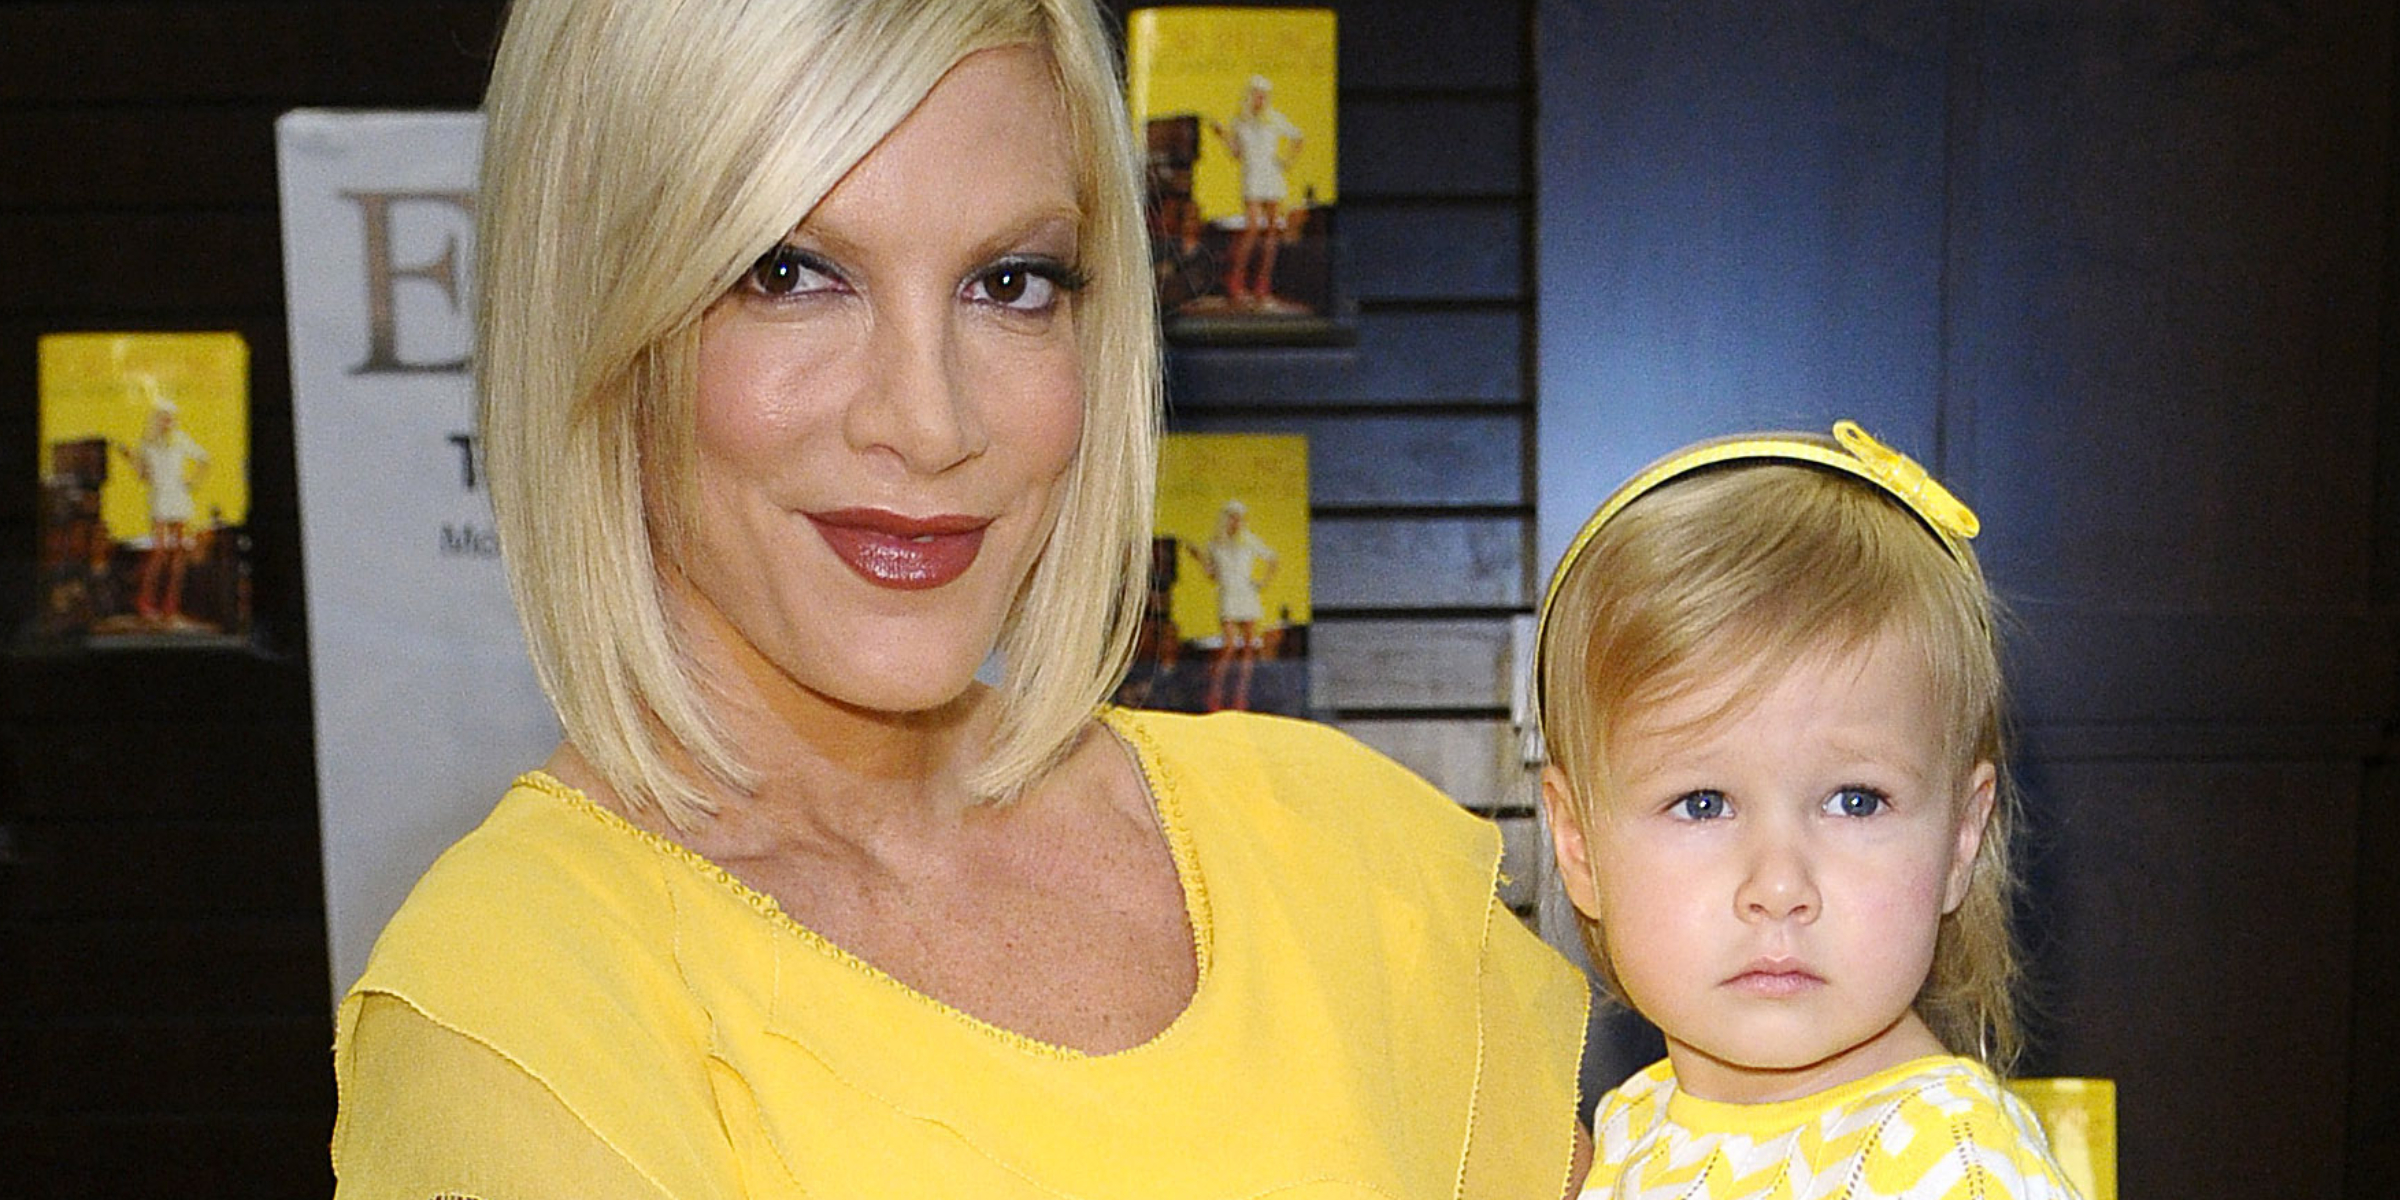 Tori Spelling and Stella McDermott | Source: Getty Images